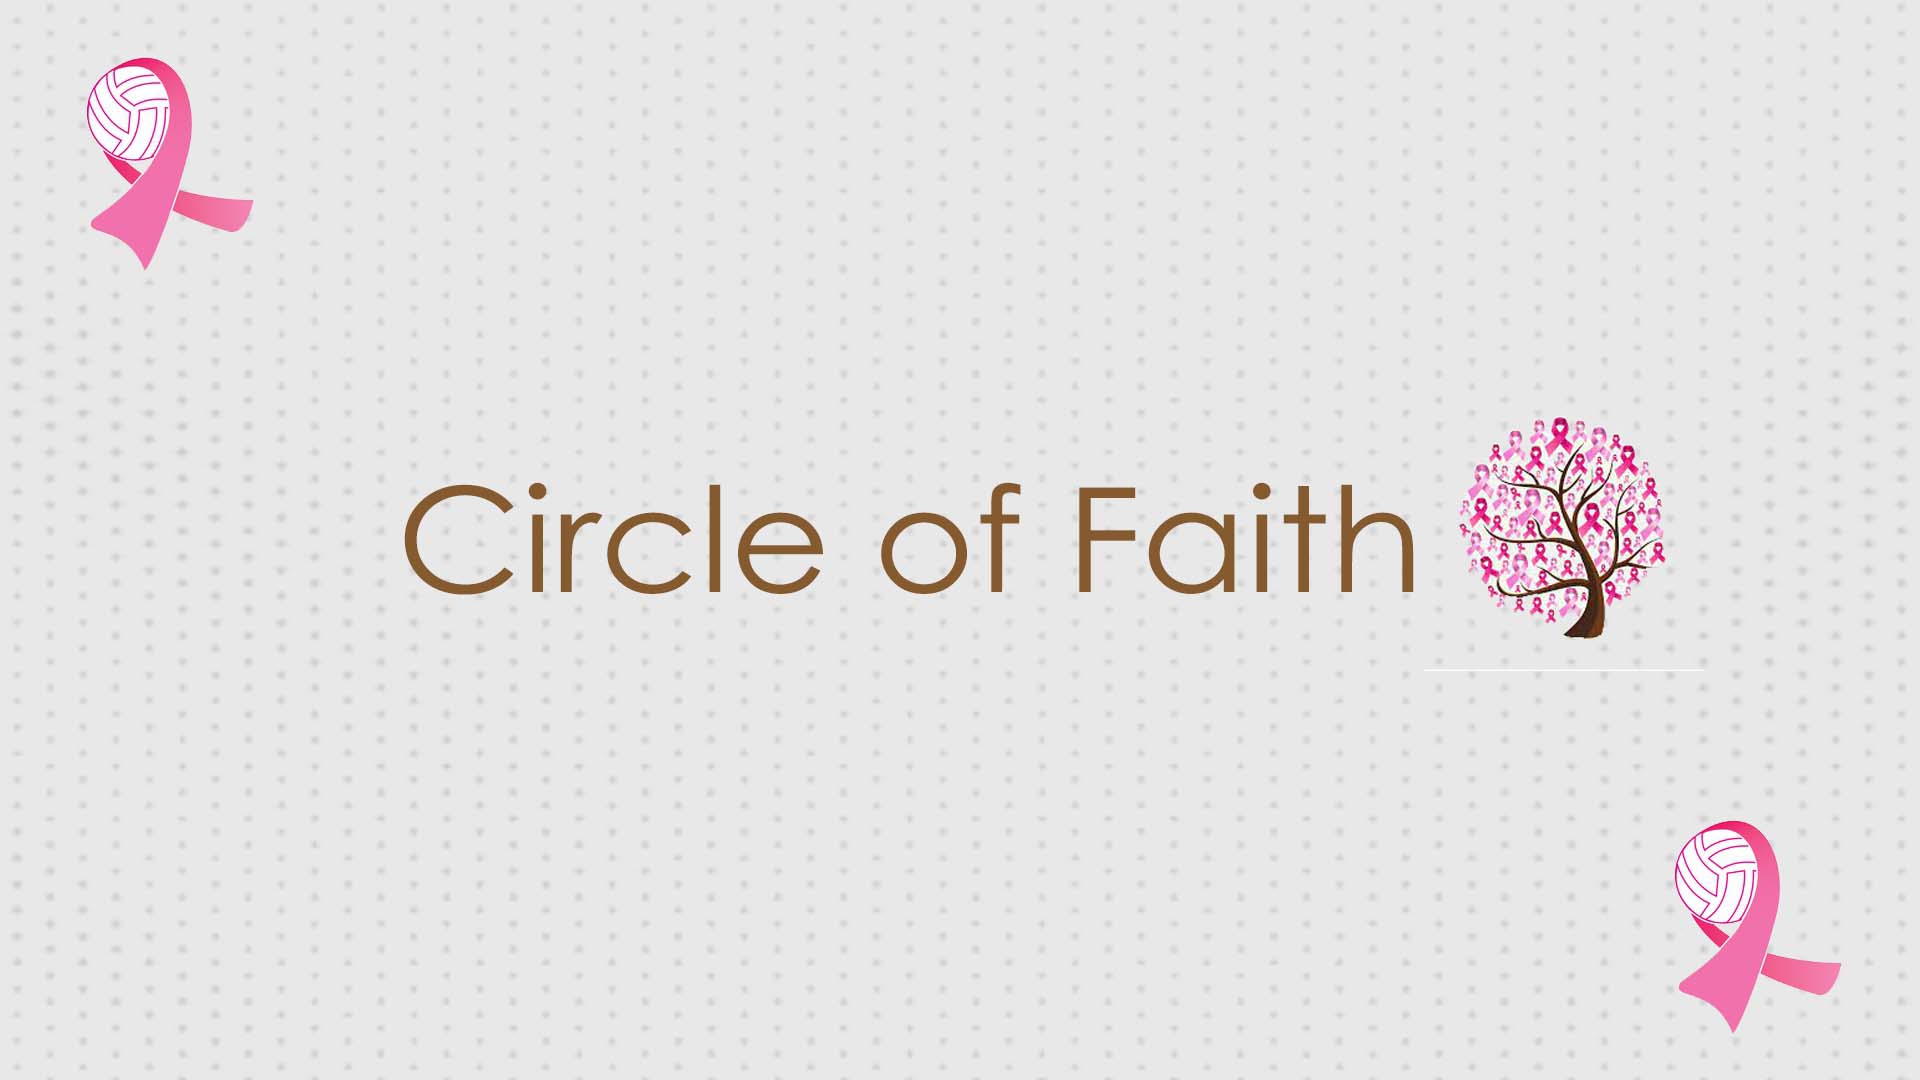 Seward County Athletics partners with Circle of Faith for Dig Pink Night